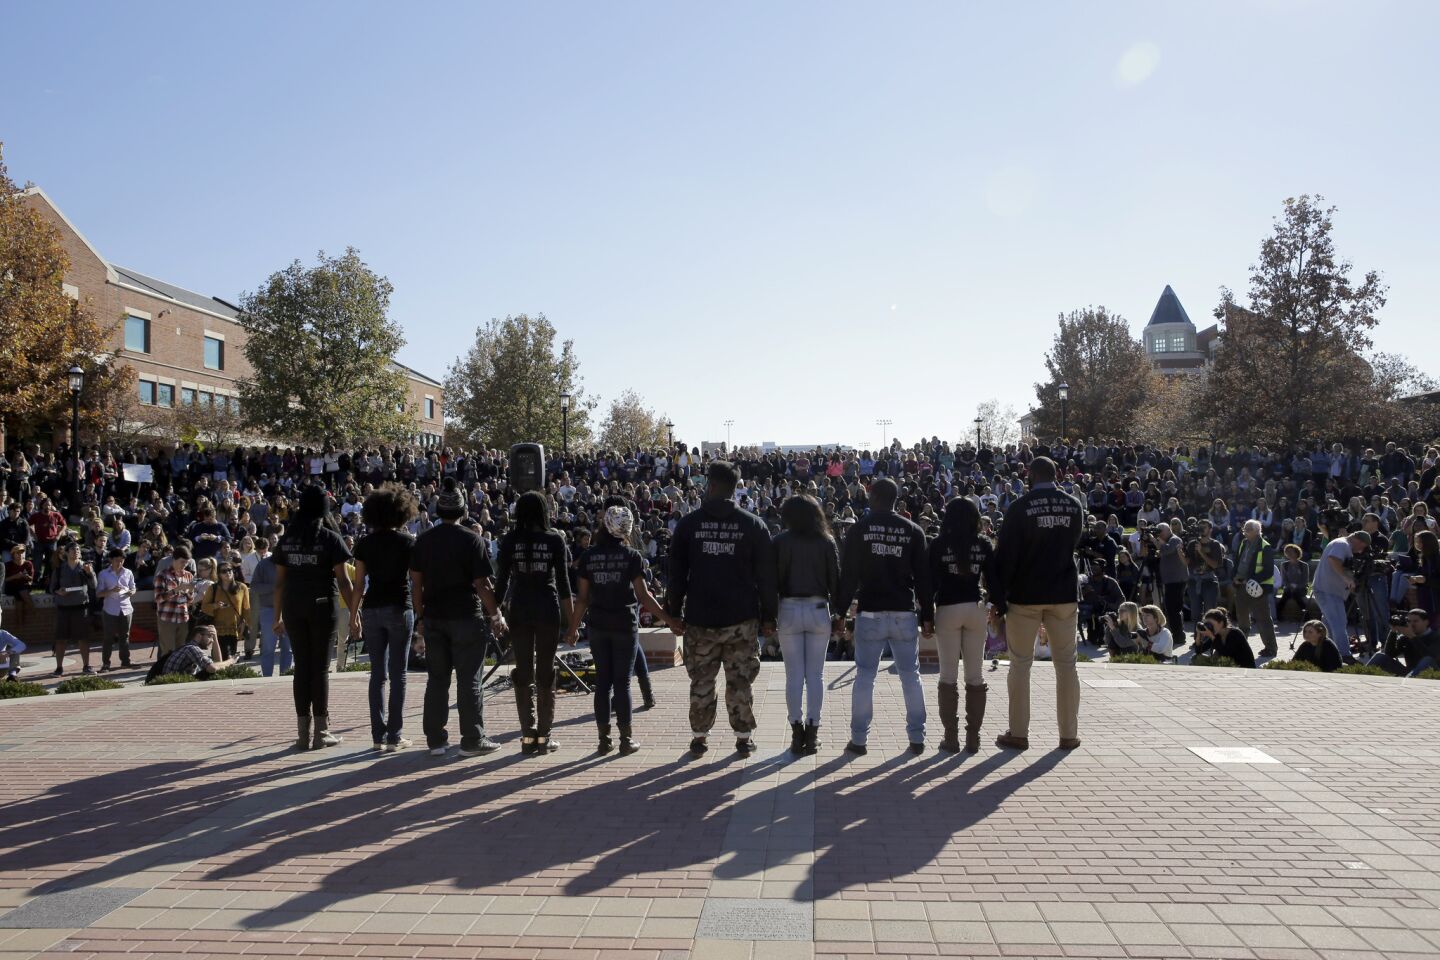 Members of the student protest group Concerned Student 1950 hold hands at the University of Missouri in Columbia, Mo., after the announcement that System President Tim Wolfe would resign. The football team and others on campus had been in open revolt over his handling of racial tensions at the school.